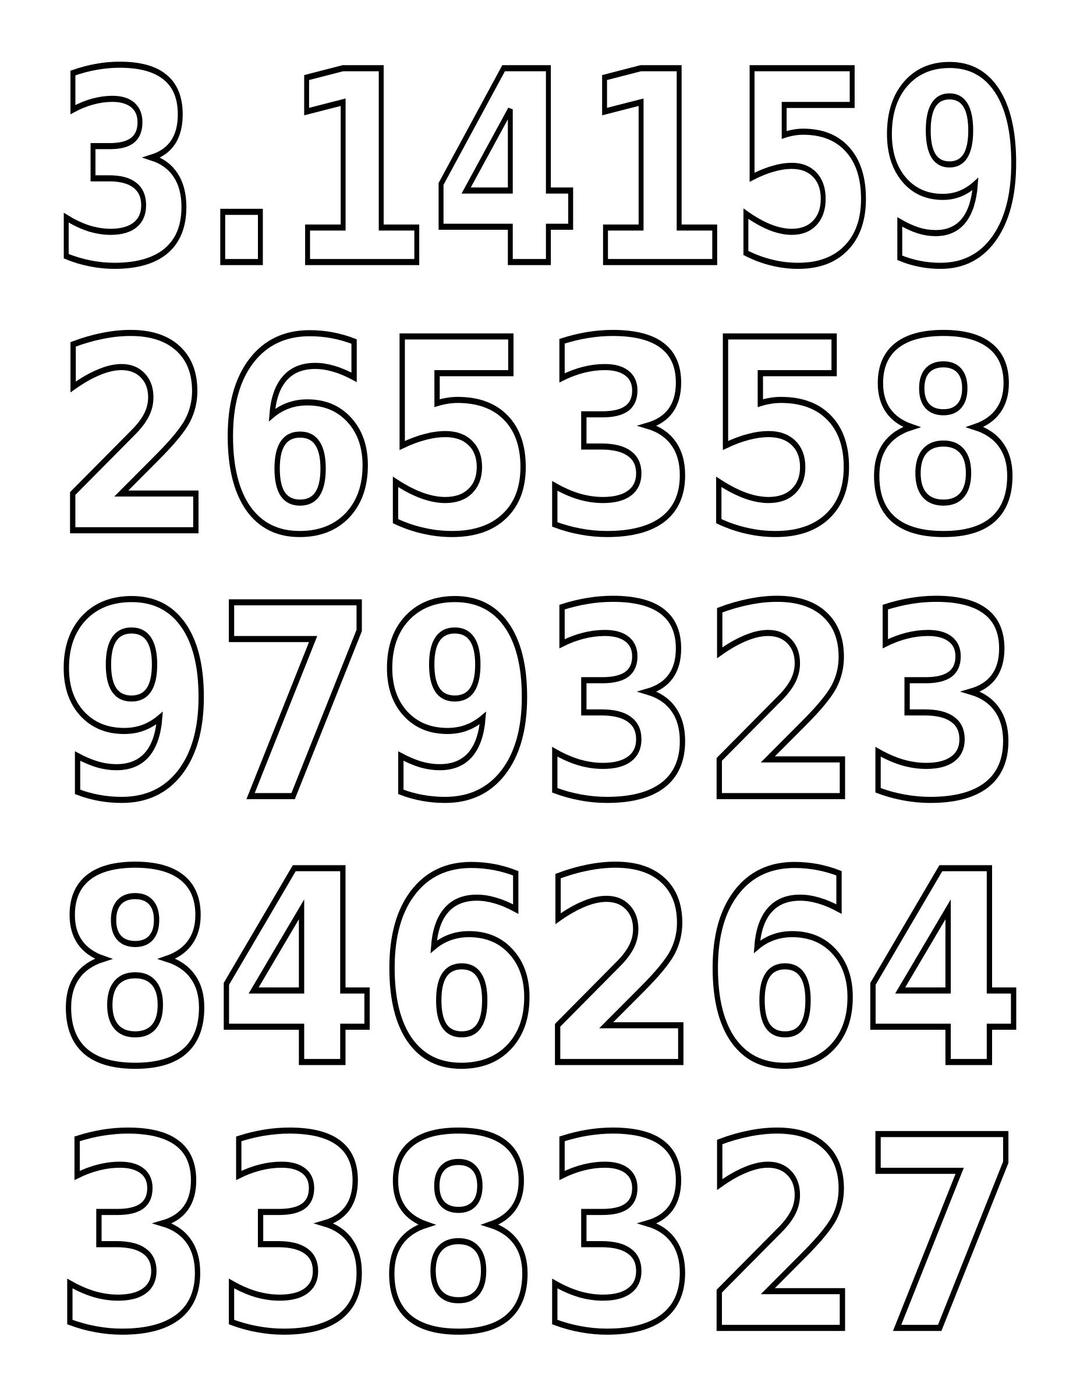 Coloring page - pi day digits of pi large png transparent